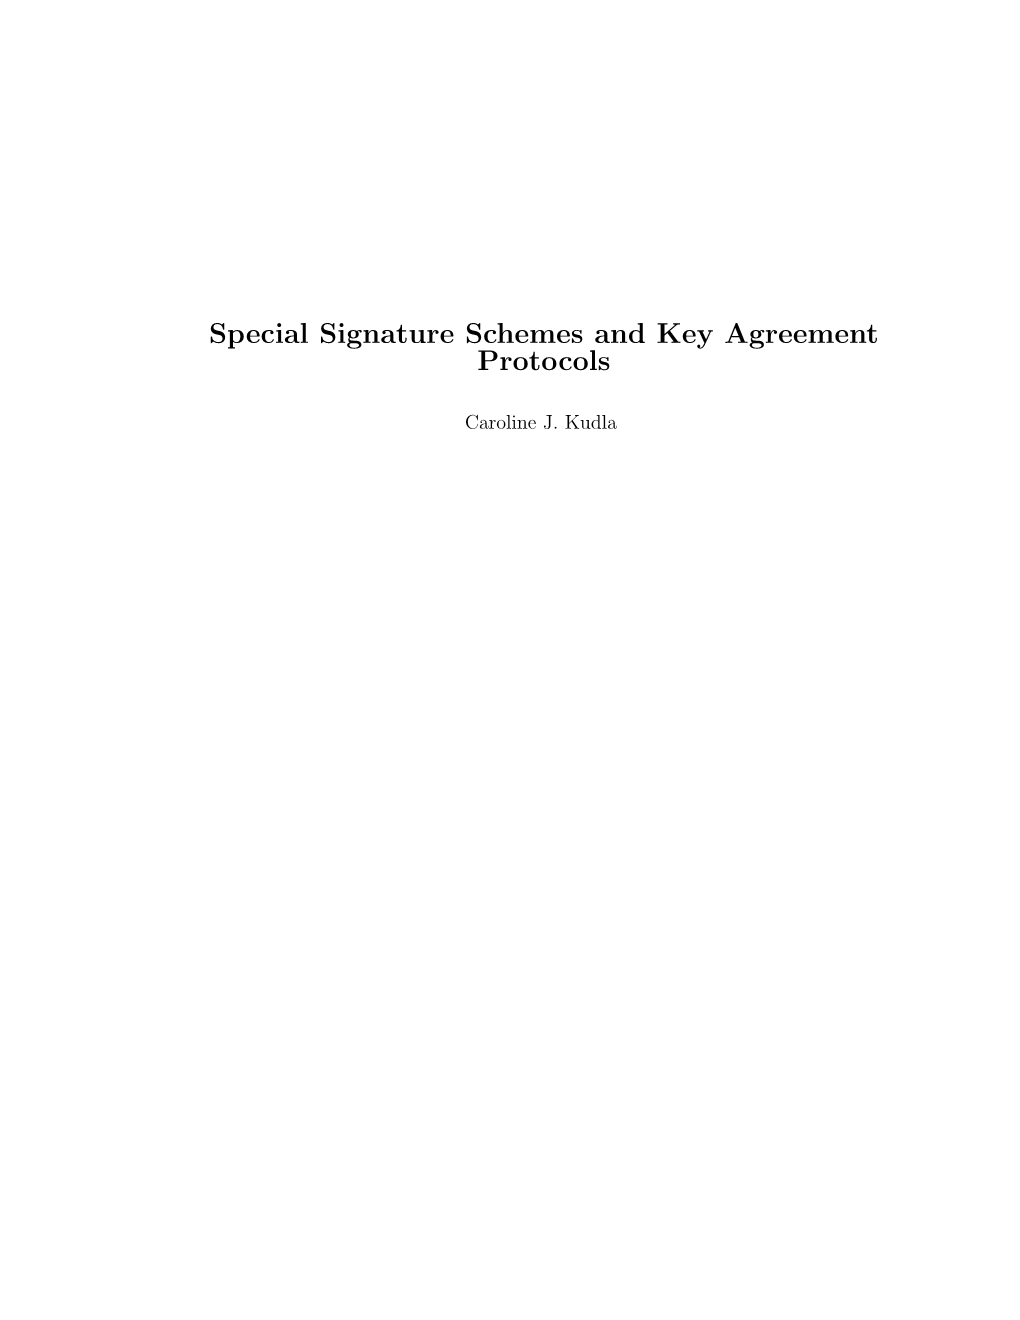 Special Signature Schemes and Key Agreement Protocols